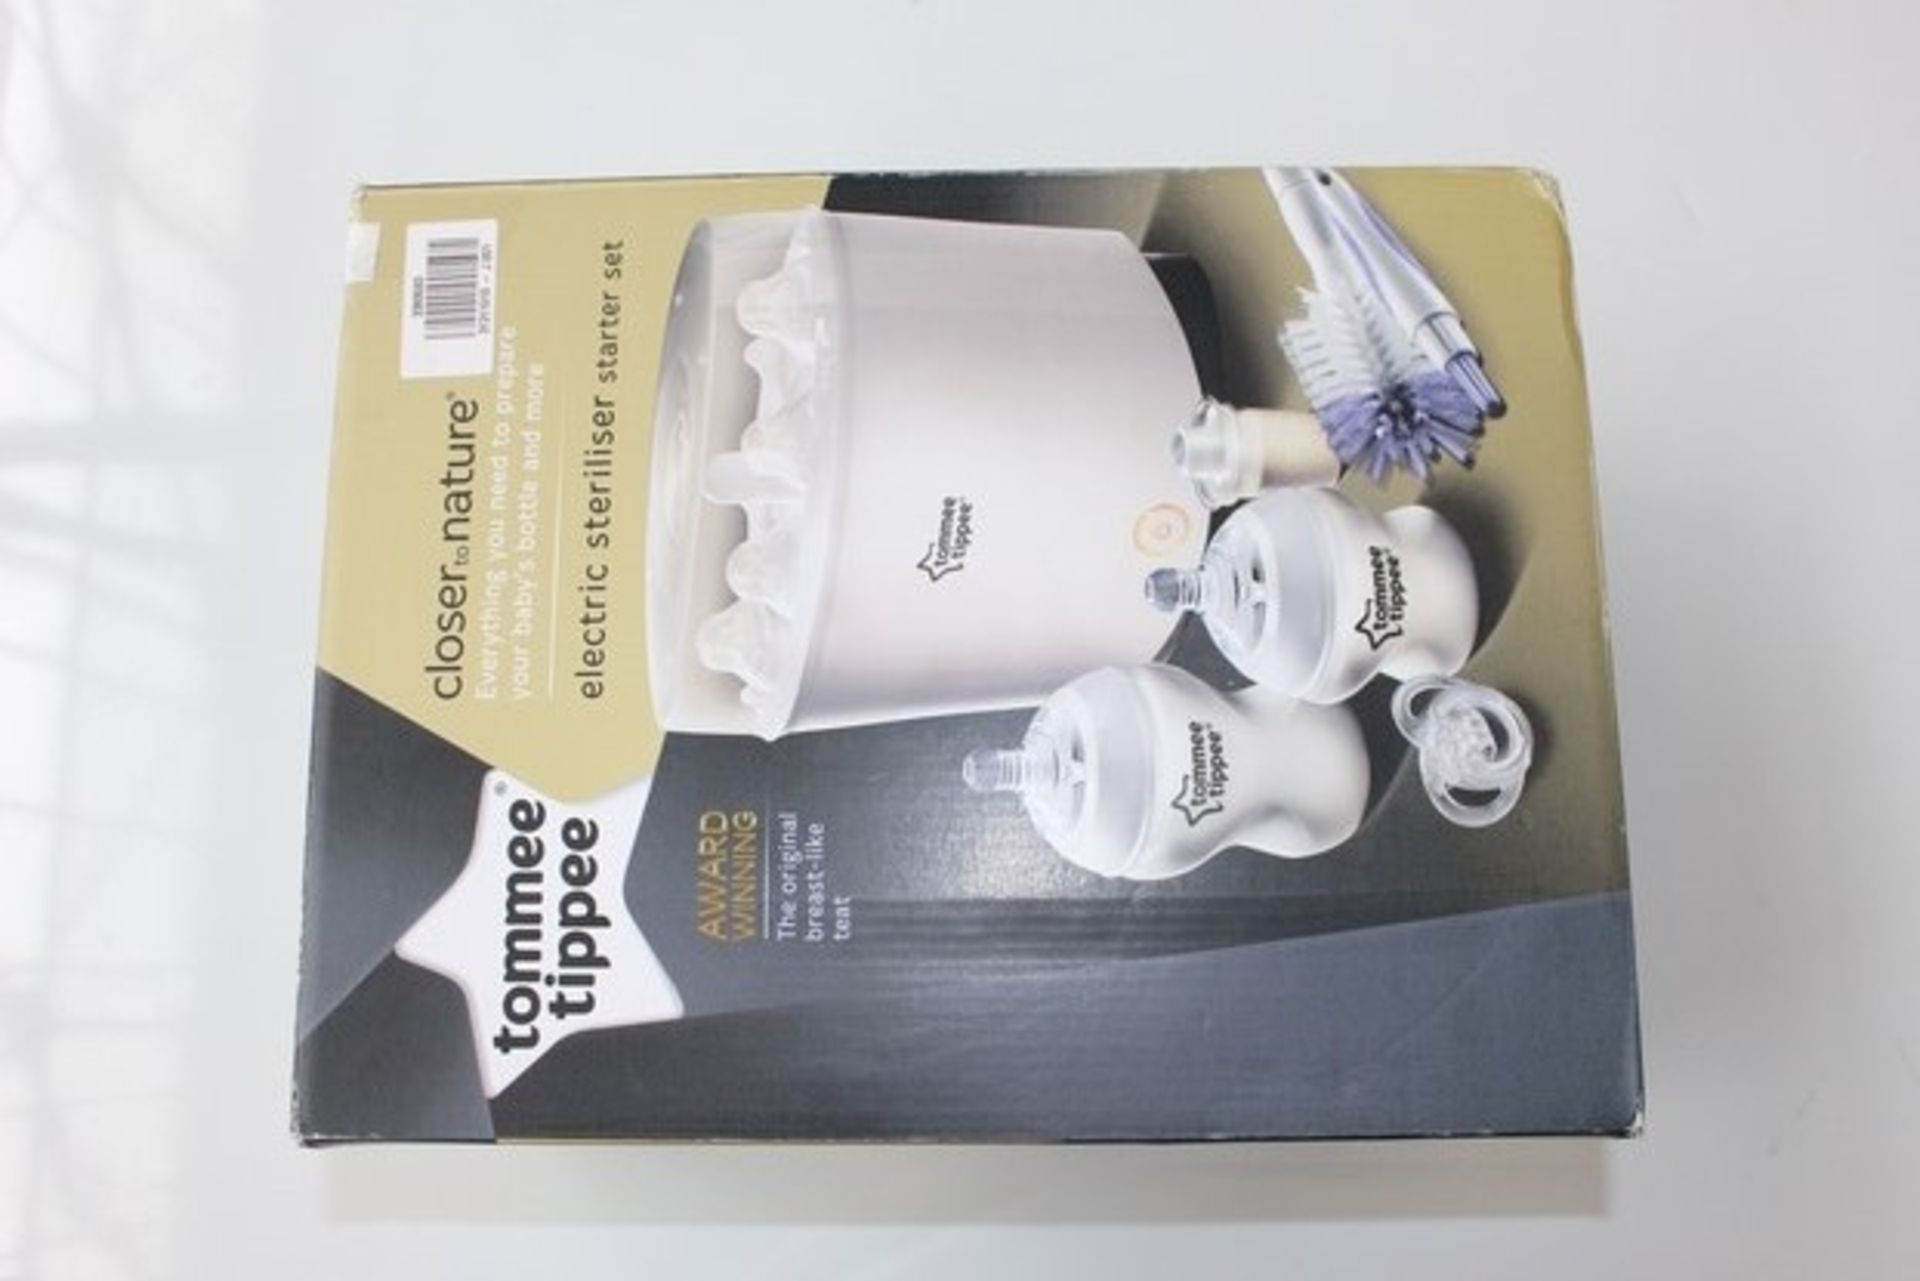 1X BOXED TOMMIE TIPPEE CLOSER TO NATURE ELECTRIC STERILIZER STARTER SET RRP £60 (JL-9294478) (12/